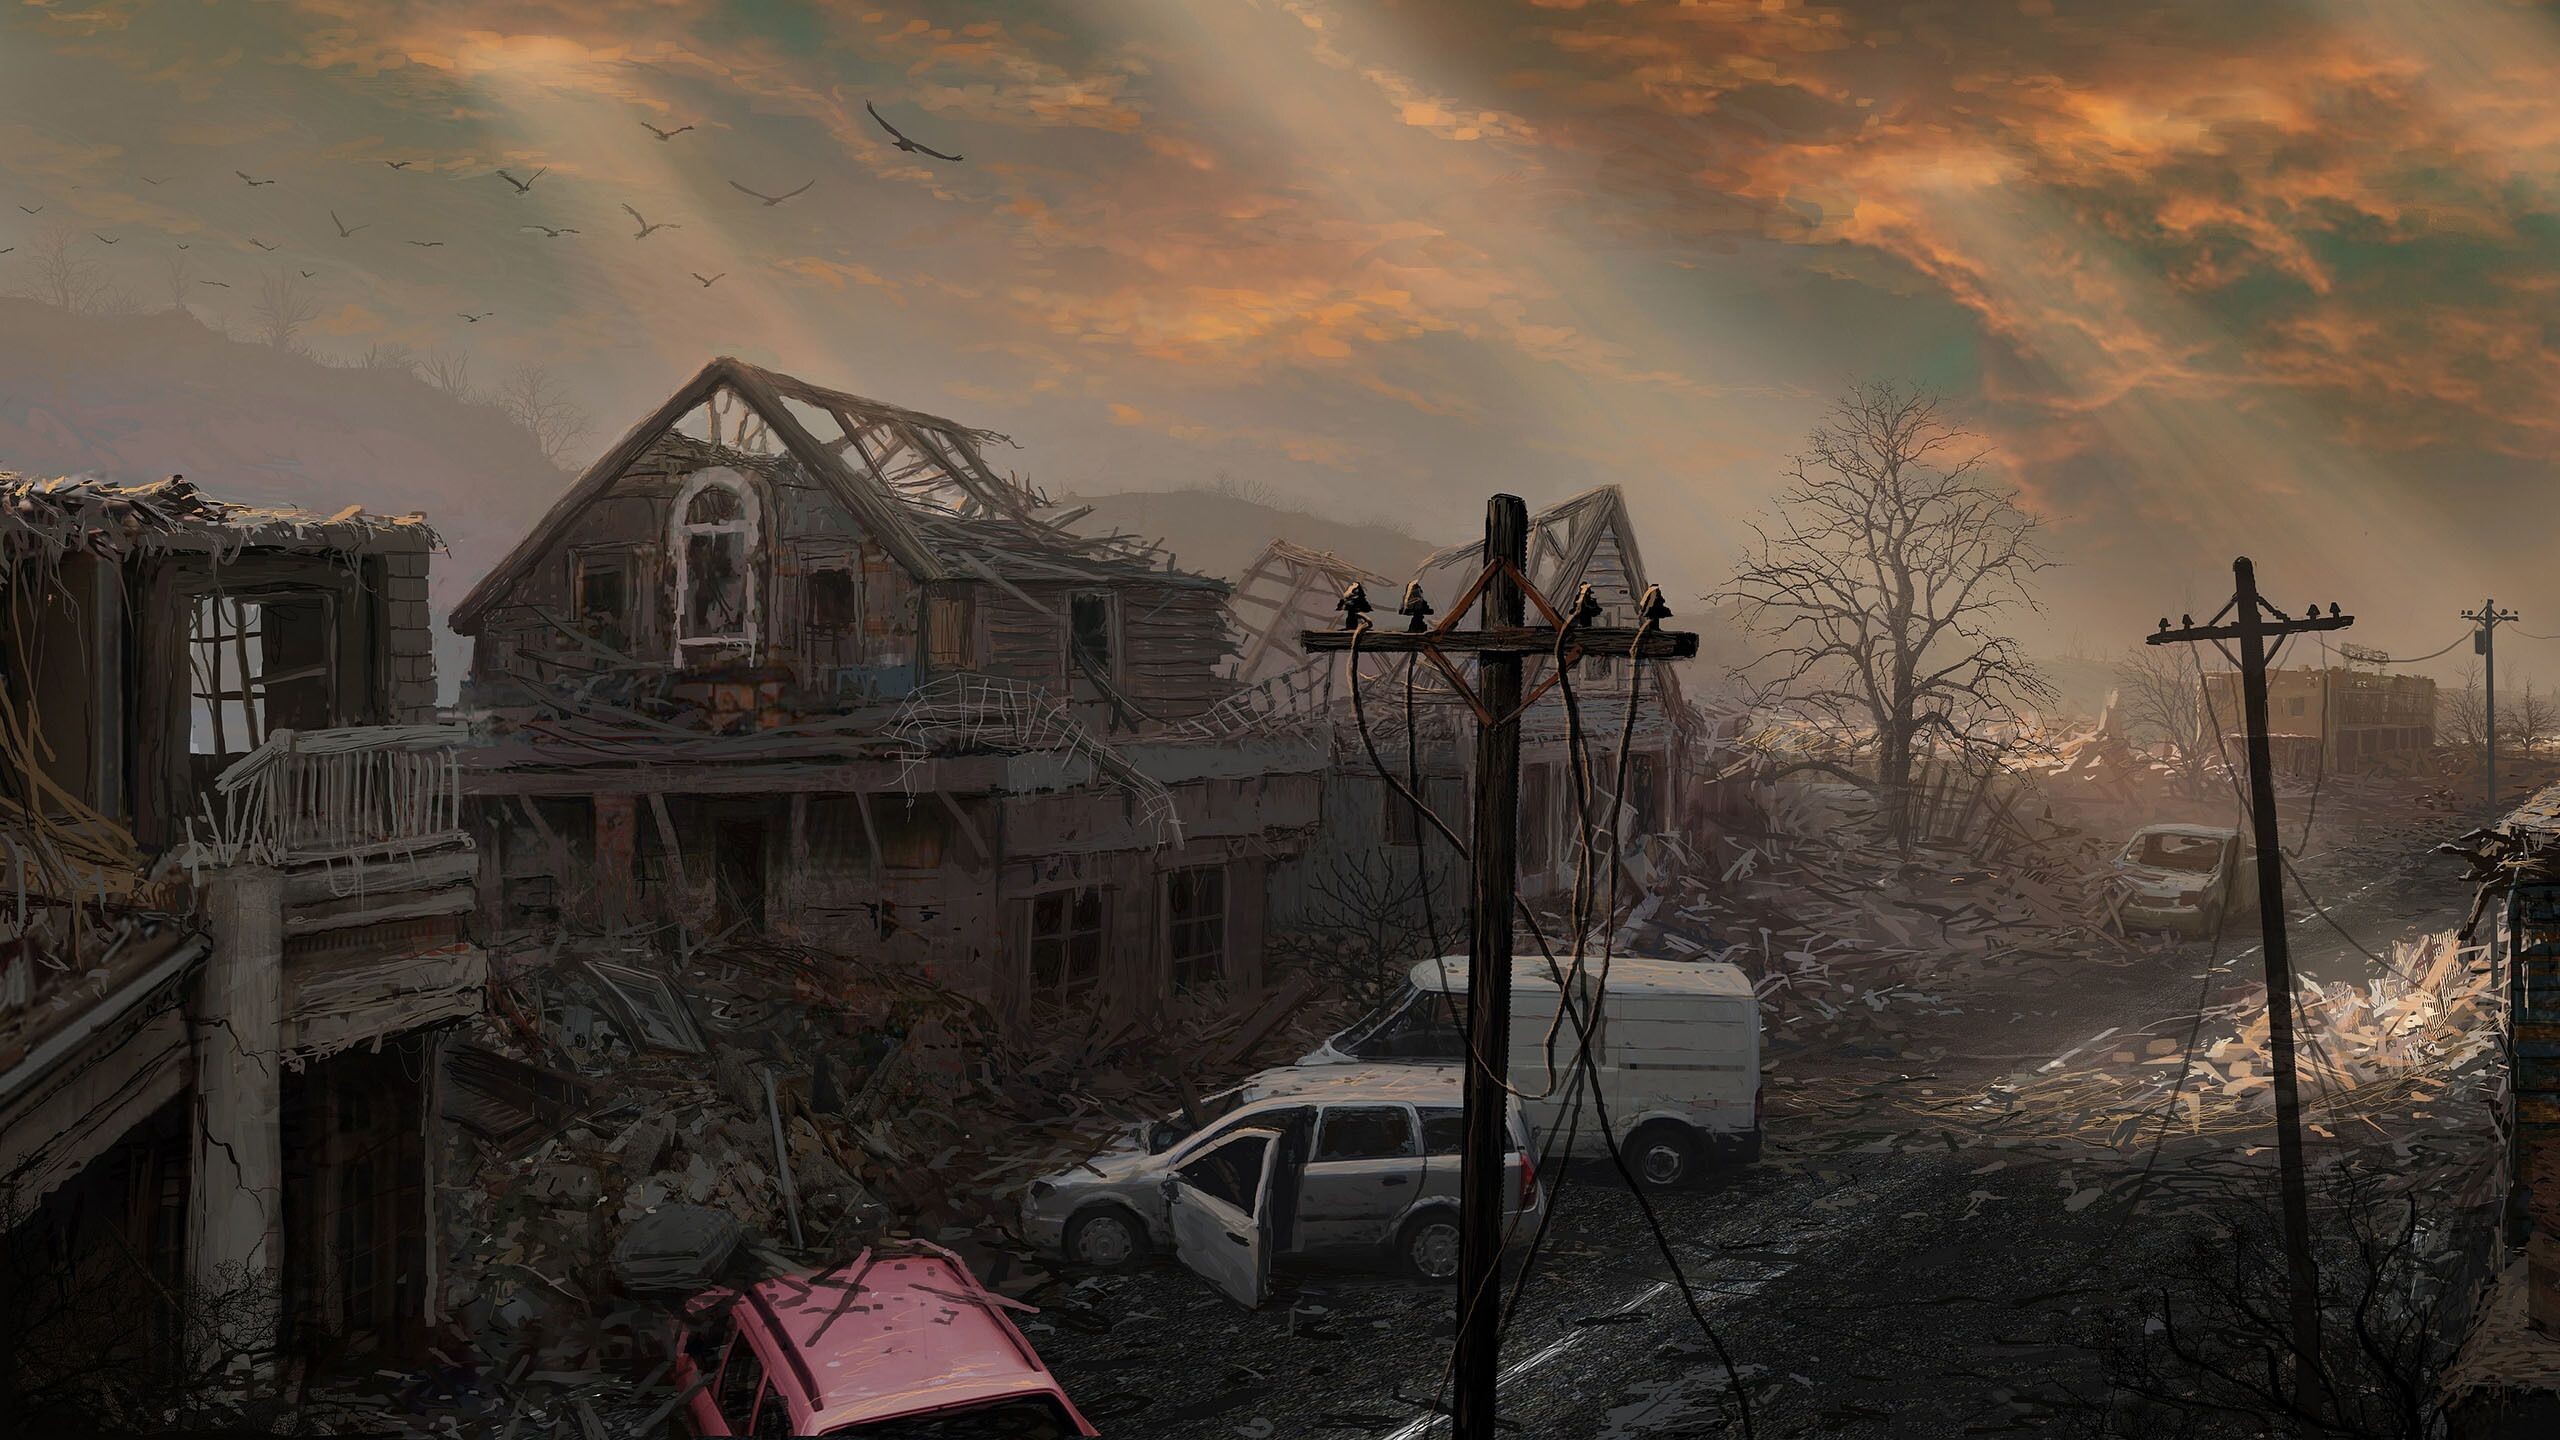 Ghost Town: The settlement that was abandoned as a result of a natural or human-made disaster. 2560x1440 HD Wallpaper.